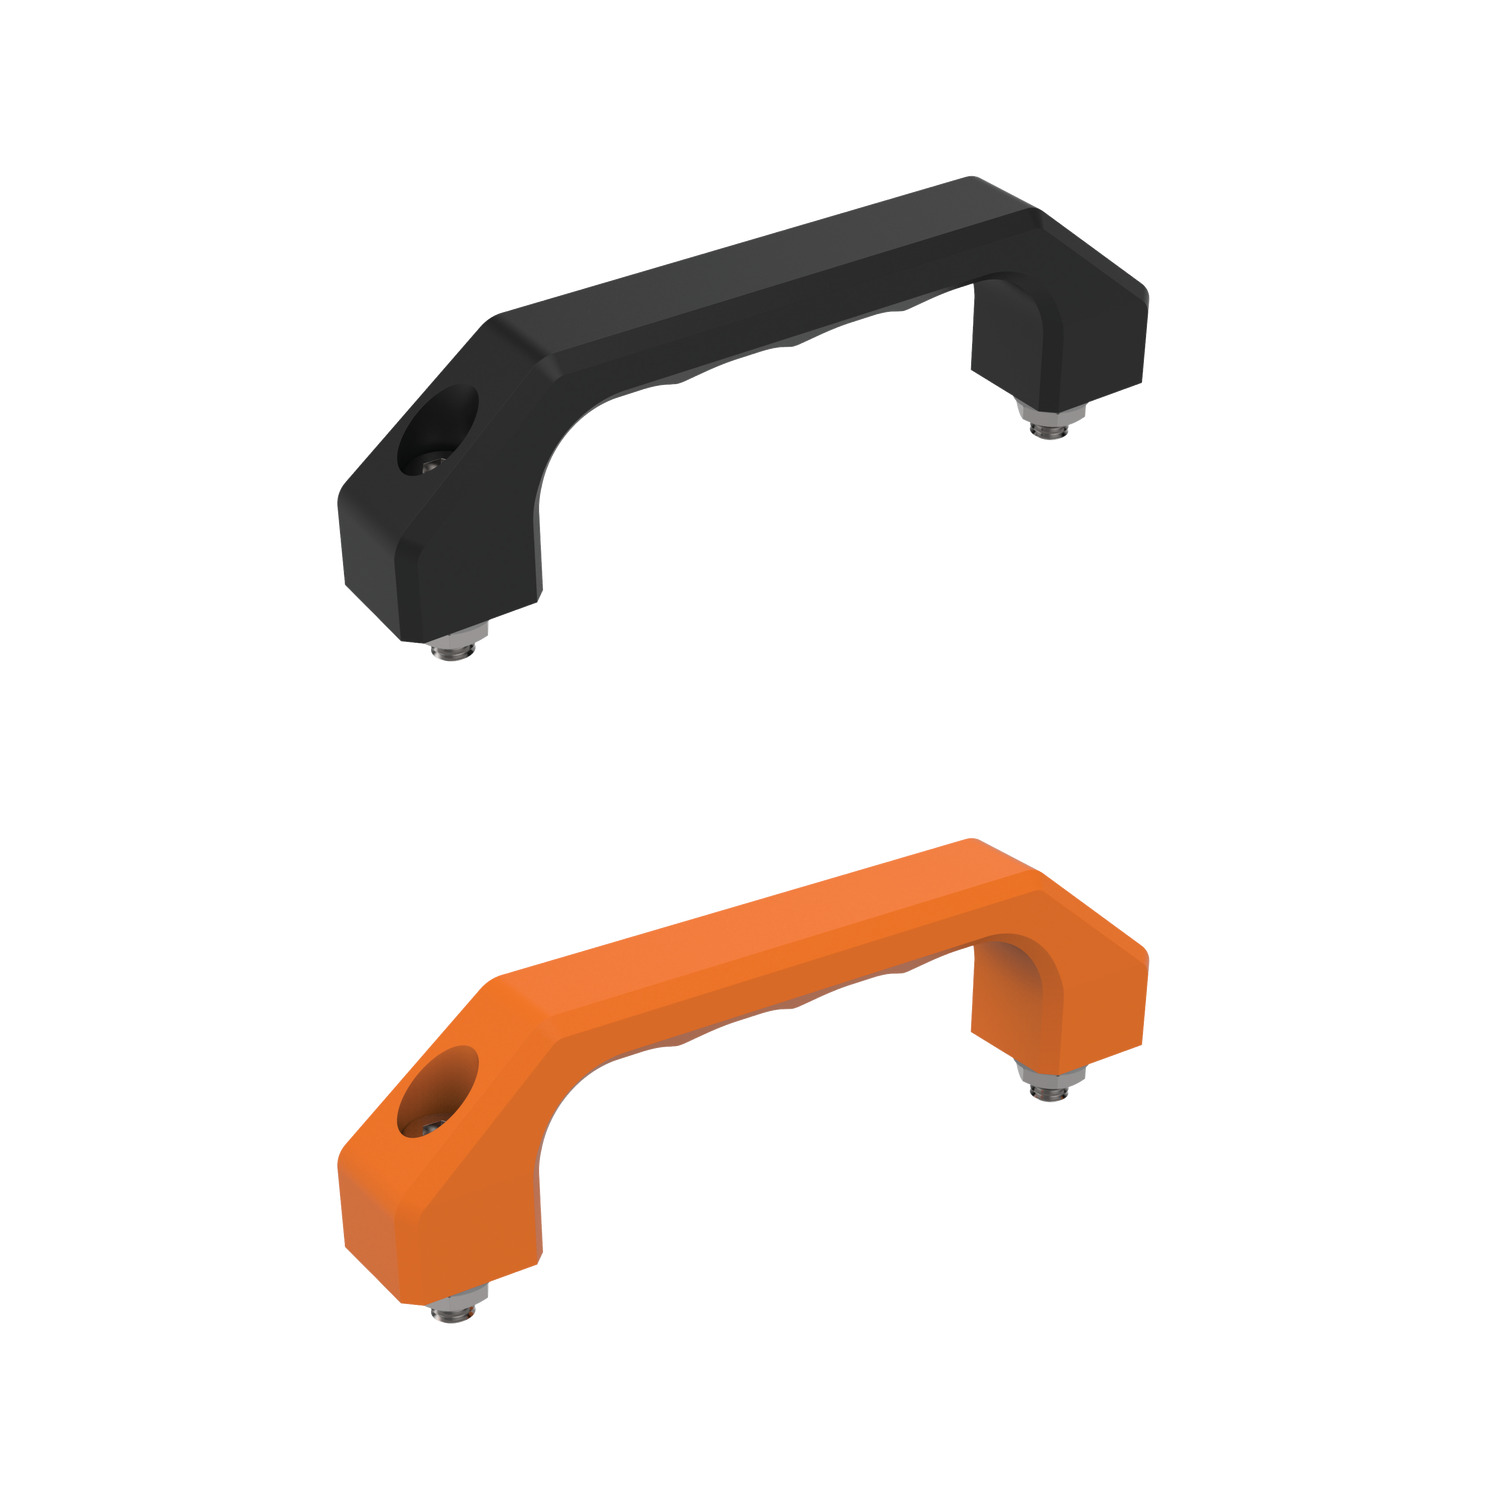 Pull Handles Solid plastic pull handle. This pull handle is a modern industrial design for the highest demands. Extremely resistant to torsion and easy to grip.